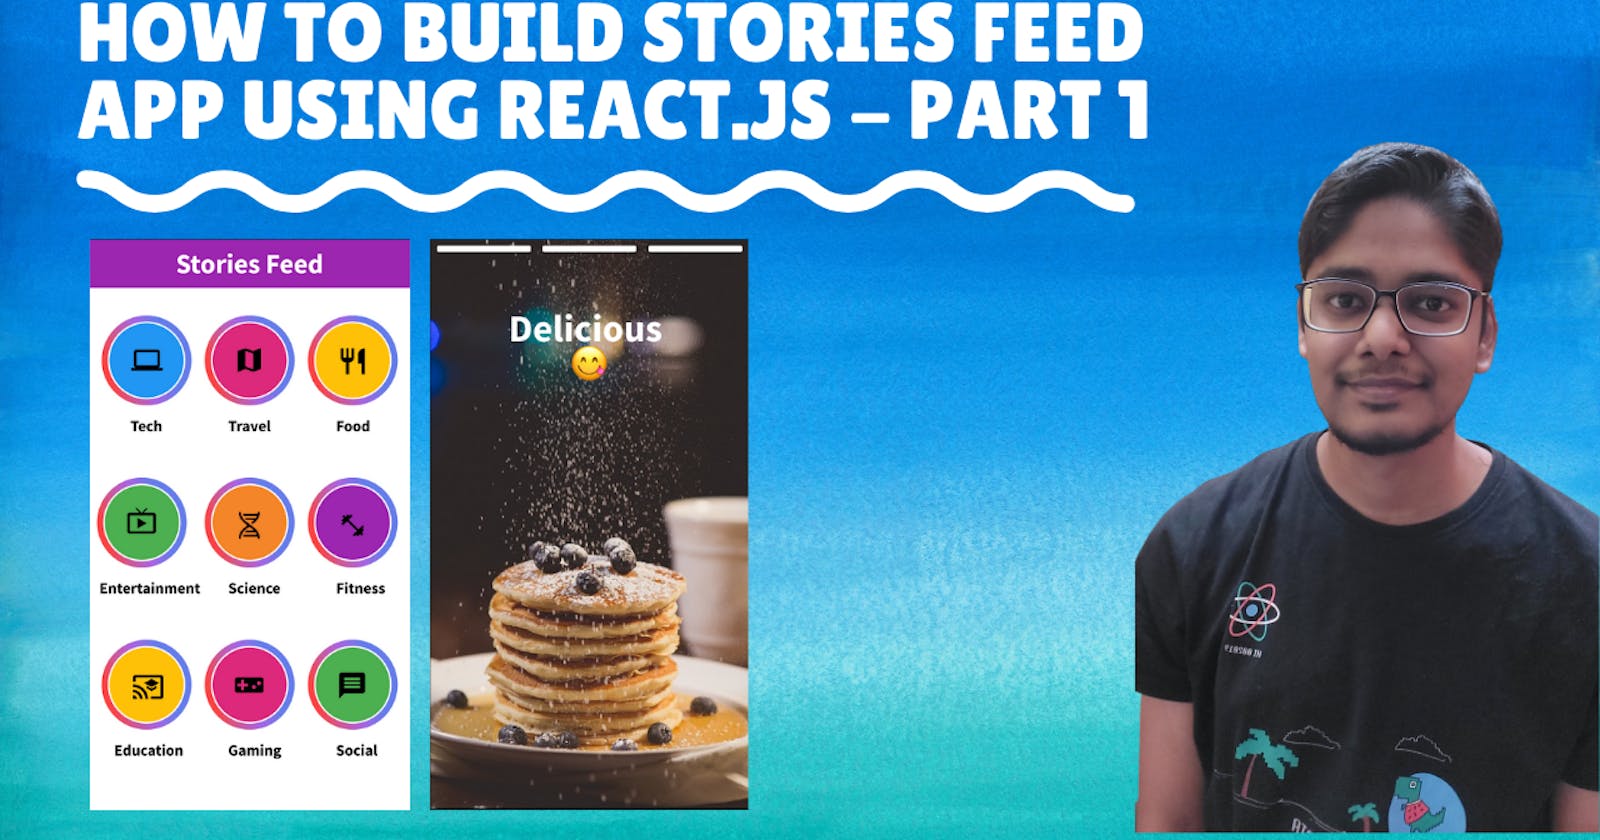 Build stories feed app using react.js -  Part 1